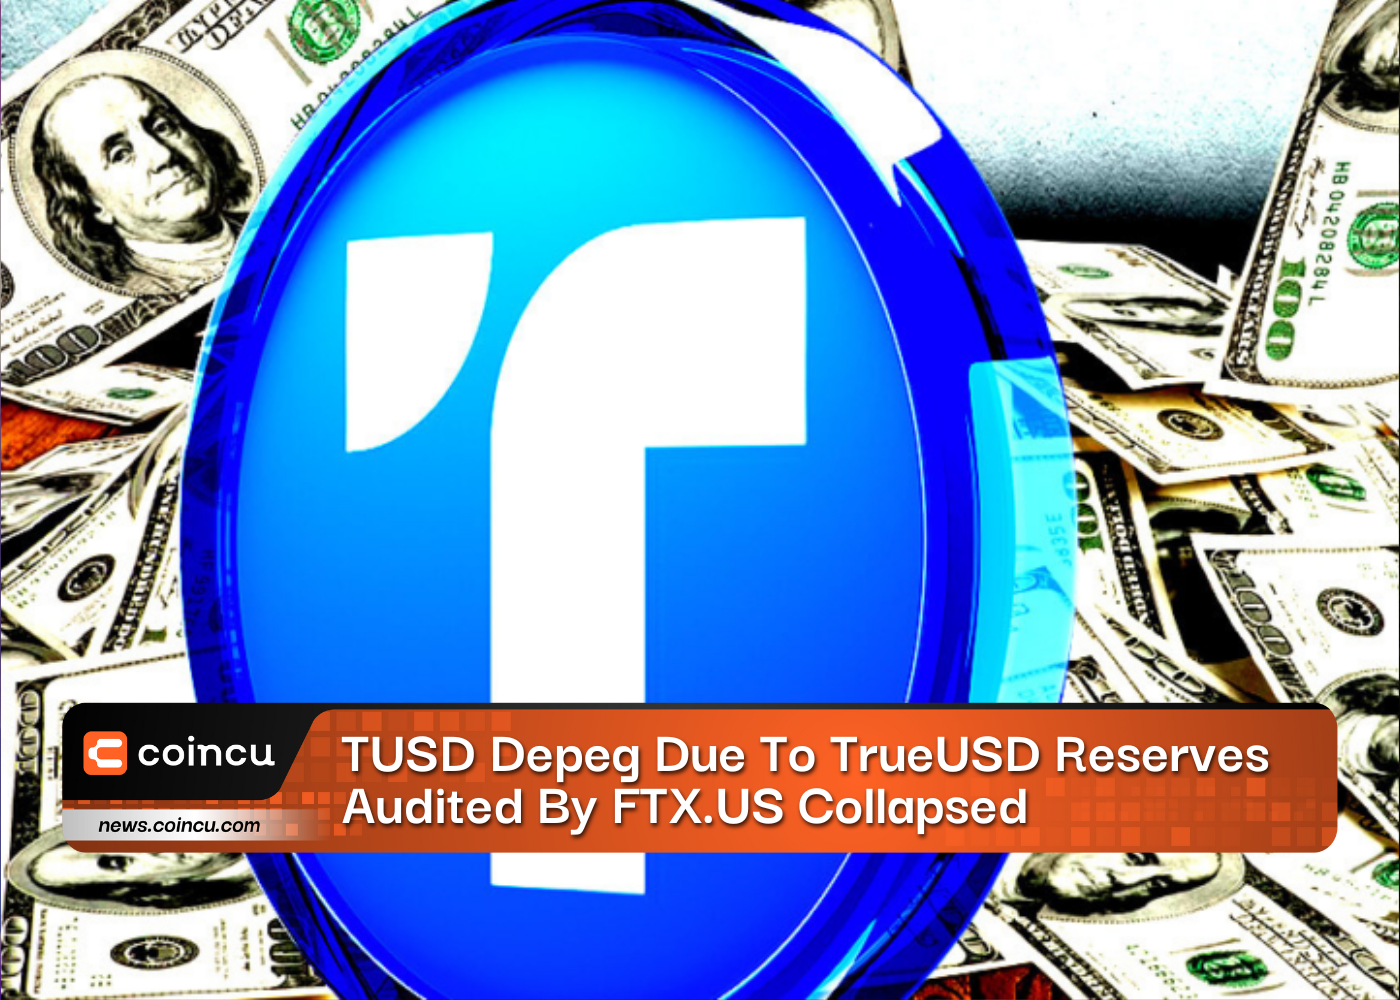 TUSD Depeg Due To TrueUSD Reserves Audited By FTX.US Collapsed